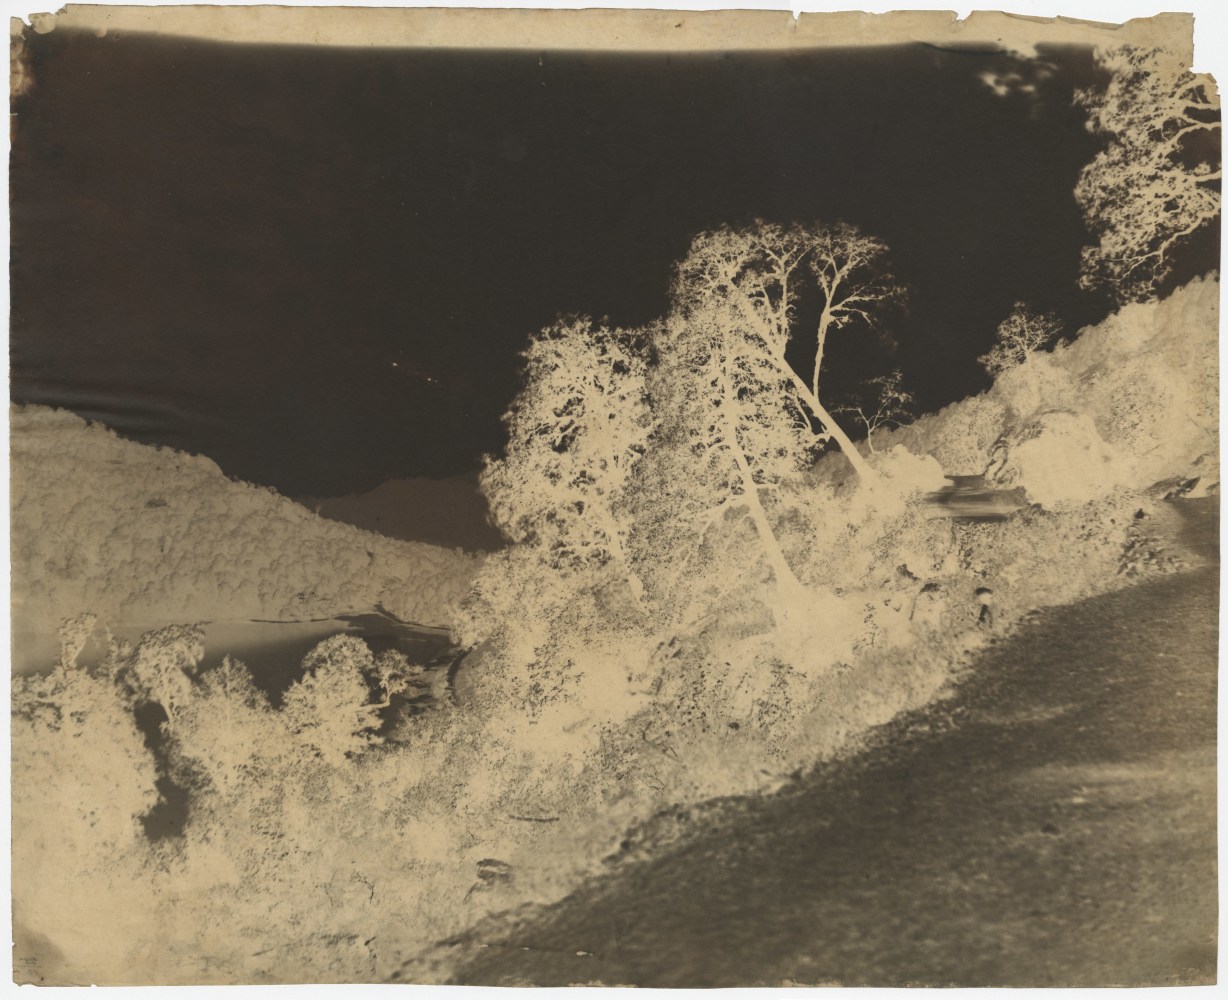 Dr. John MURRAY (Scottish, active in India, 1809-1898) View of lake, India, circa 1858-1862 Calotype negative, waxed, with selectively applied pigment 38.2 x 47.2 cm Inscribed &quot;25/12&quot; in ink on verso